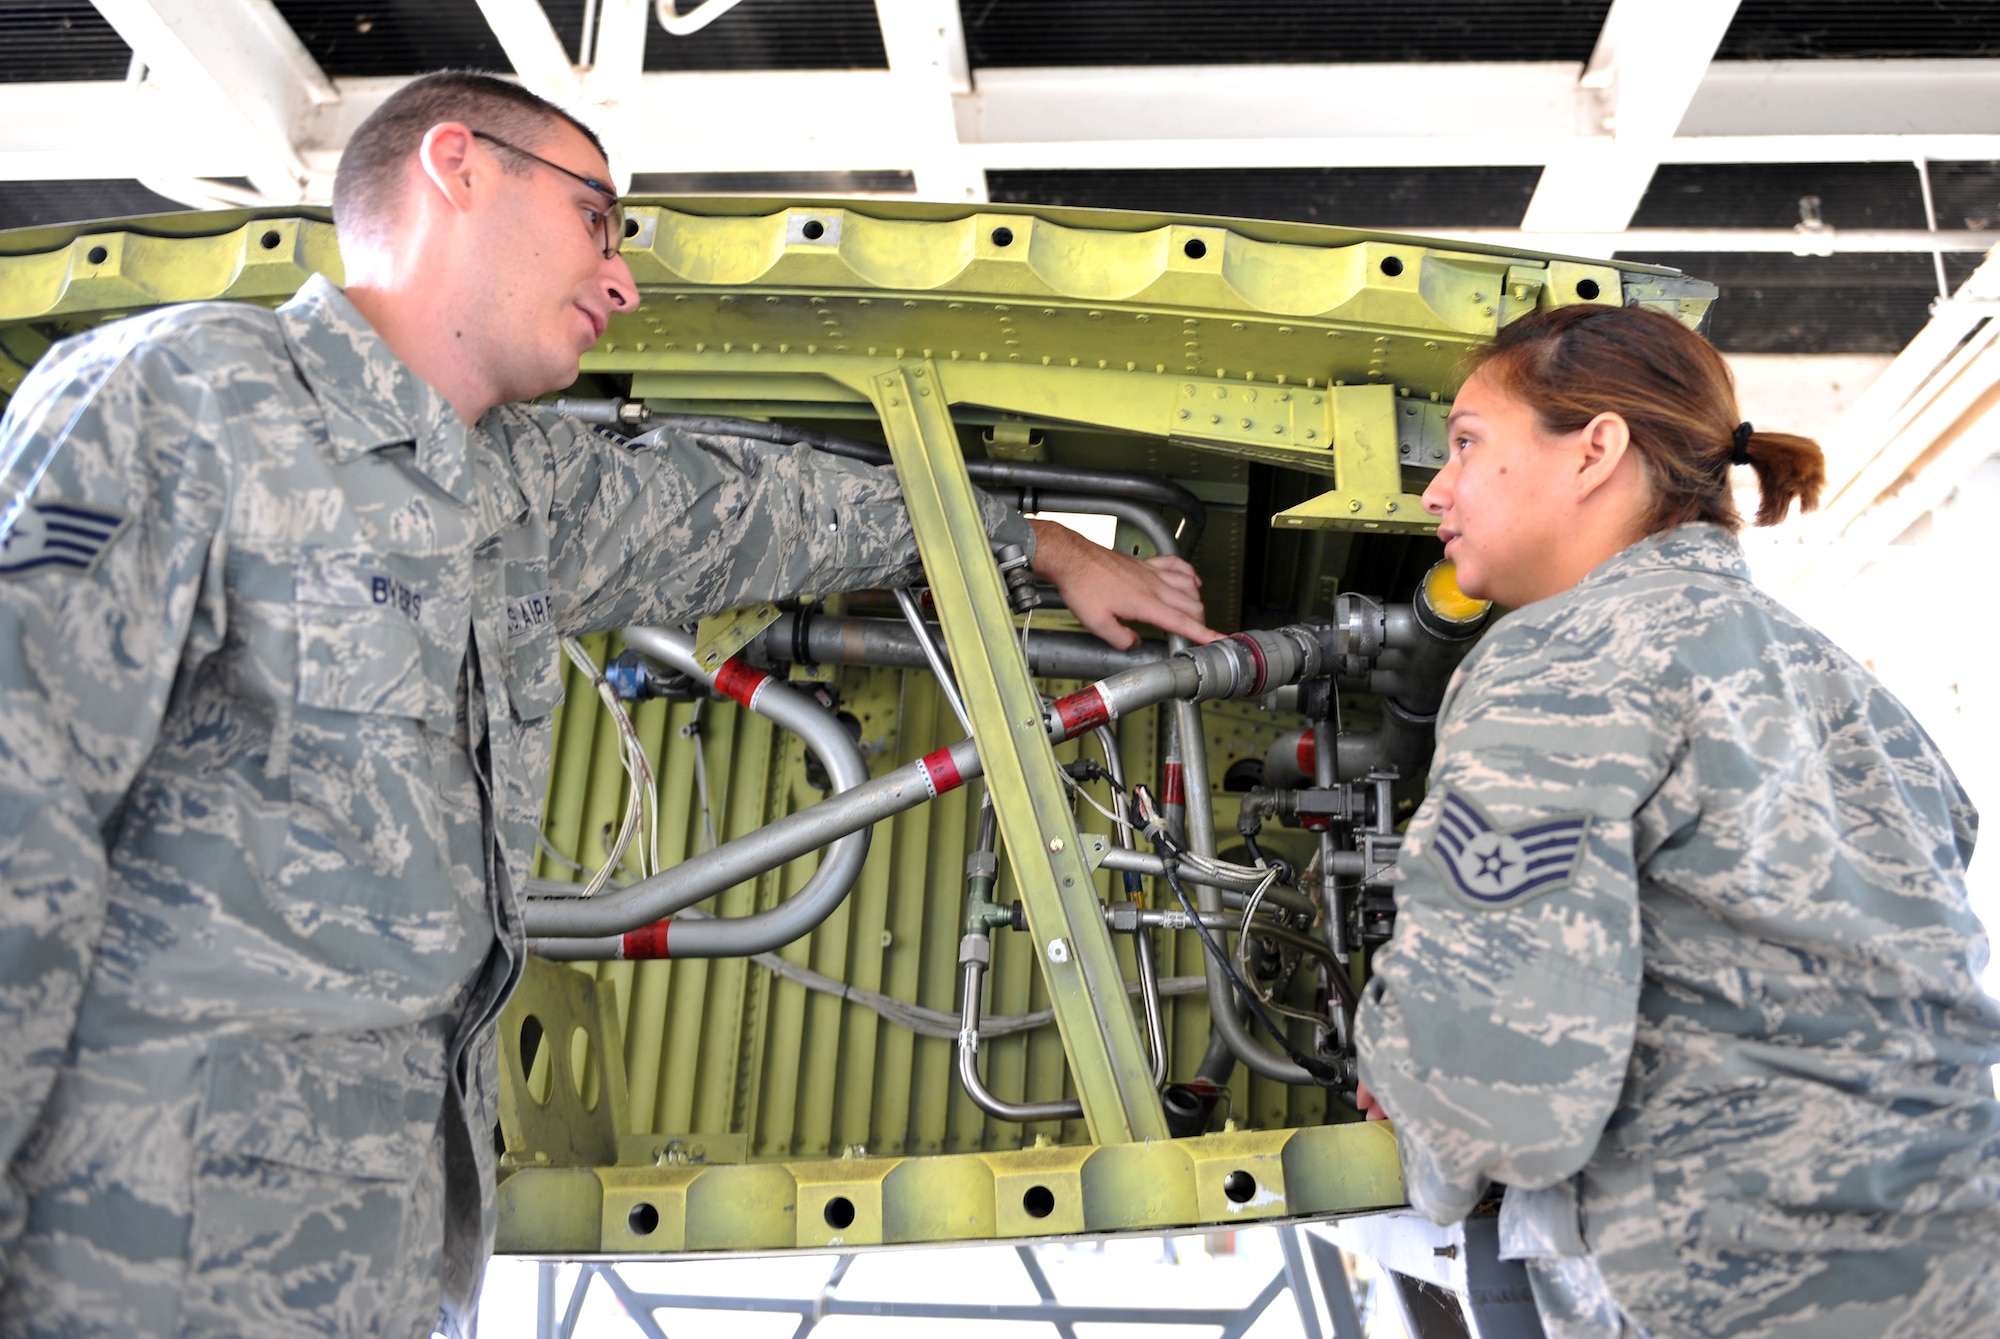 Staff Sgt. Jesse Byers (left) and Staff Sgt. Jennifer Peche, 19th Component Maintenance Squadron aircraft fuels systems repair craftsmen, discuss maintenance to fuel pipes and connections on a C-130 aircraft training wing July 16. The aircraft fuels systems repair Airmen use a three-man concept on all their jobs to ensure safety and timely repair to C-130 fuels systems. (U.S. Air Force photo by Senior Airman Steele C. G. Britton)